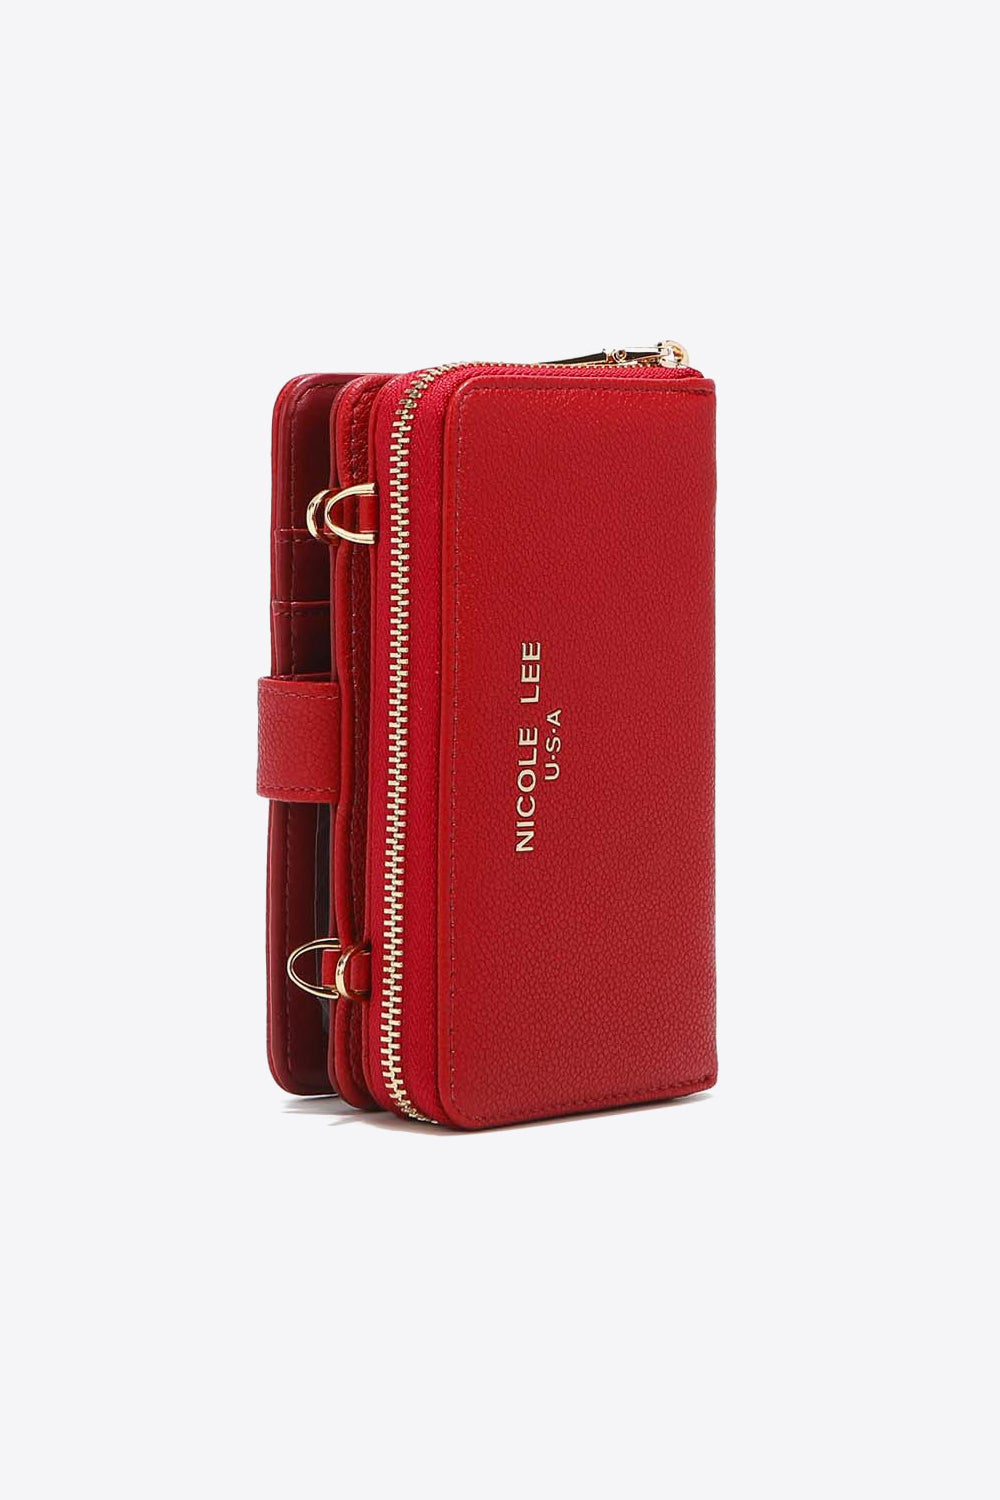 Nicole Lee - Shipped from USA - Two-Piece Crossbody Phone Case Wallet - Premium Two-Piece Crossbody Phone Case Wallet from Concordia Style Boutique - Just $28.90! Shop now at Concordia Style Boutique